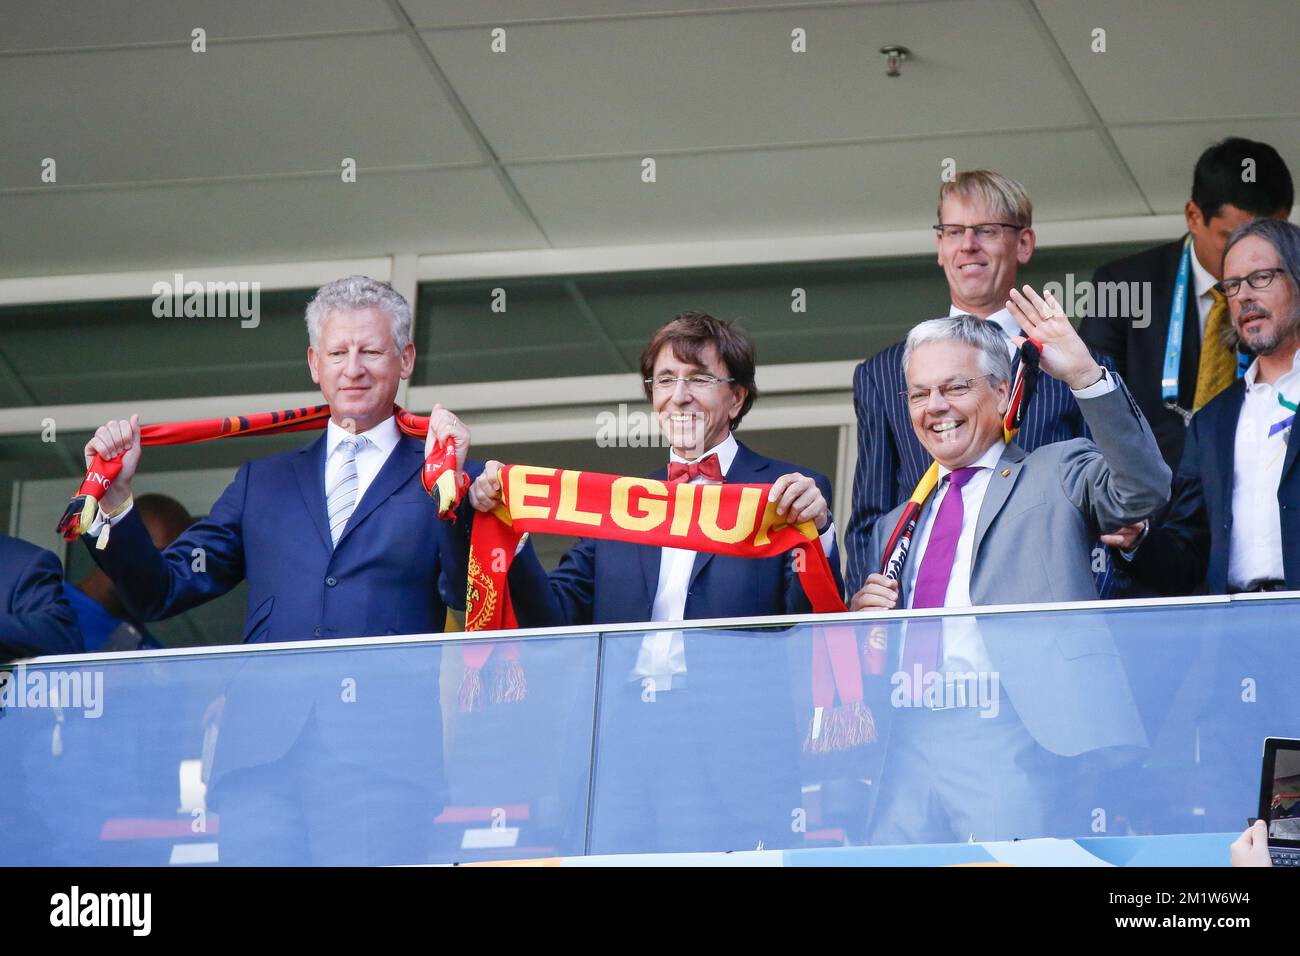 Outgoing Vice-Minister and Defence Minister Pieter De Crem, Outgoing Prime Minister Elio Di Rupo and Outgoing Vice-Prime Minister and Foreign Minister Didier Reynders pictured during the quarter final match between Belgian national soccer team Red Devils and Argentina, in Estadio Nacional Mane Garrincha, in Brasilia, Brazil, during the 2014 FIFA World Cup, Saturday 05 July 2014. BELGA PHOTO BRUNO FAHY Stock Photo